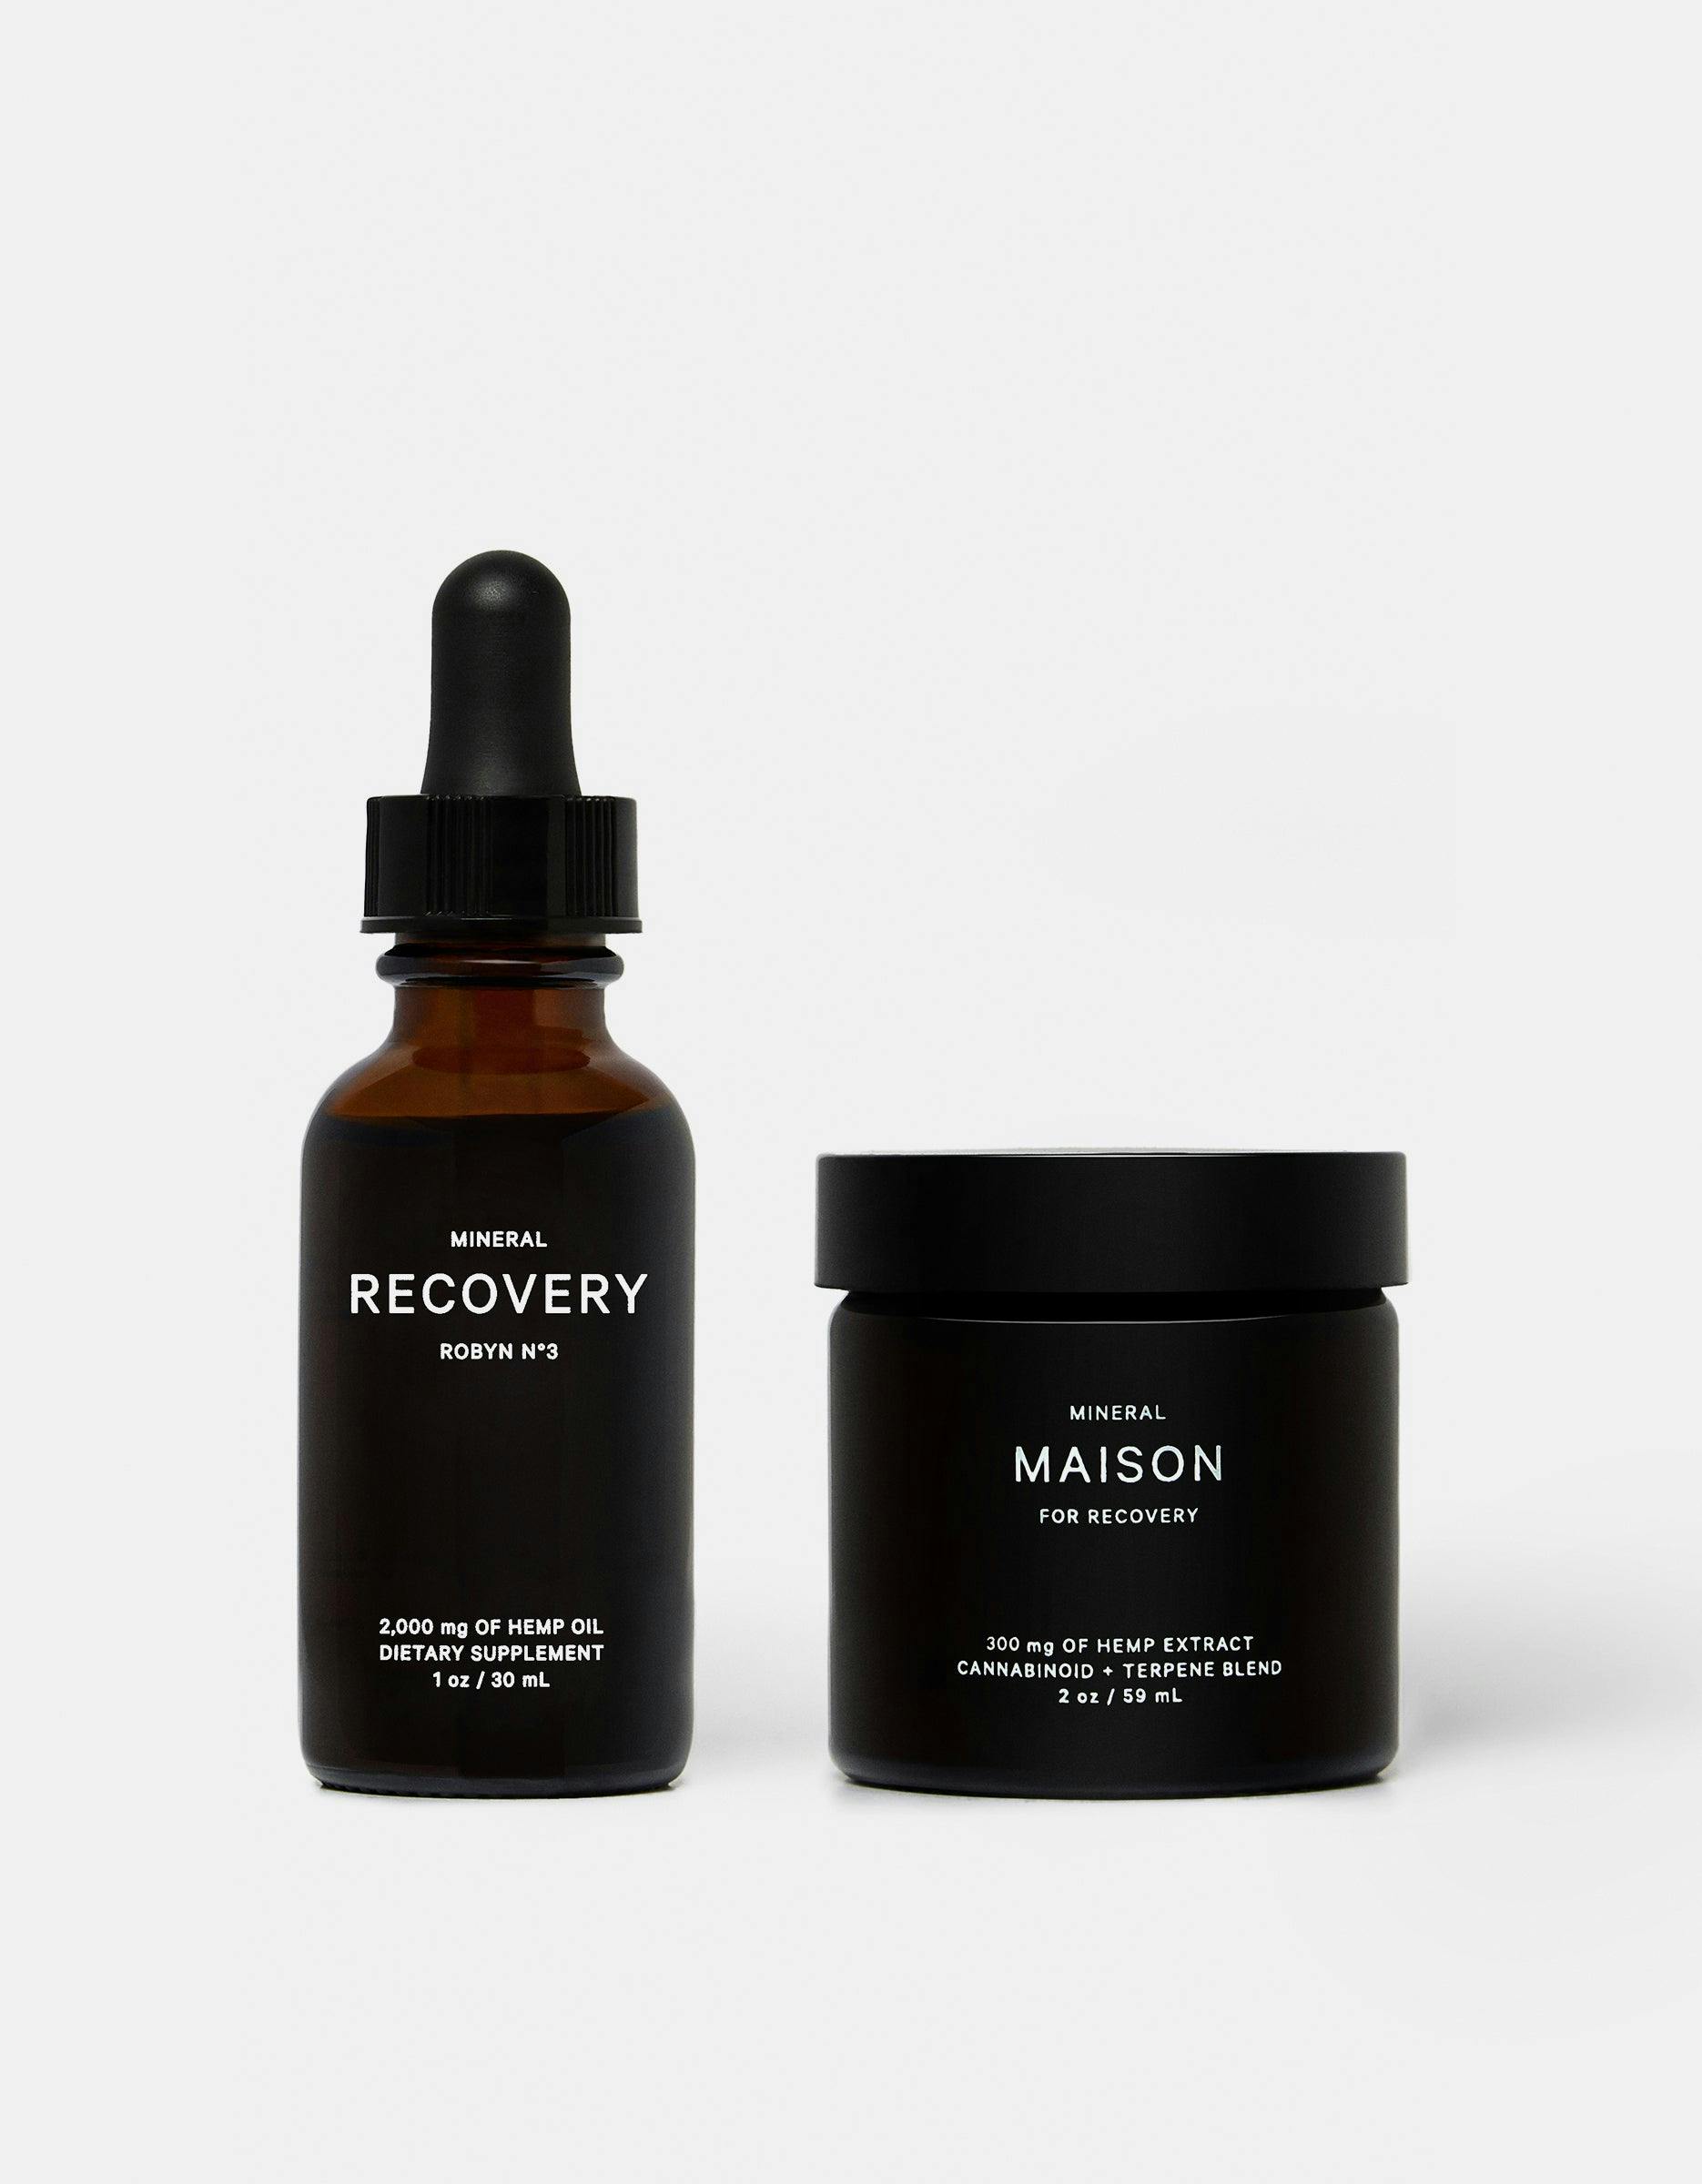 MINERAL RECOVERY KIT product